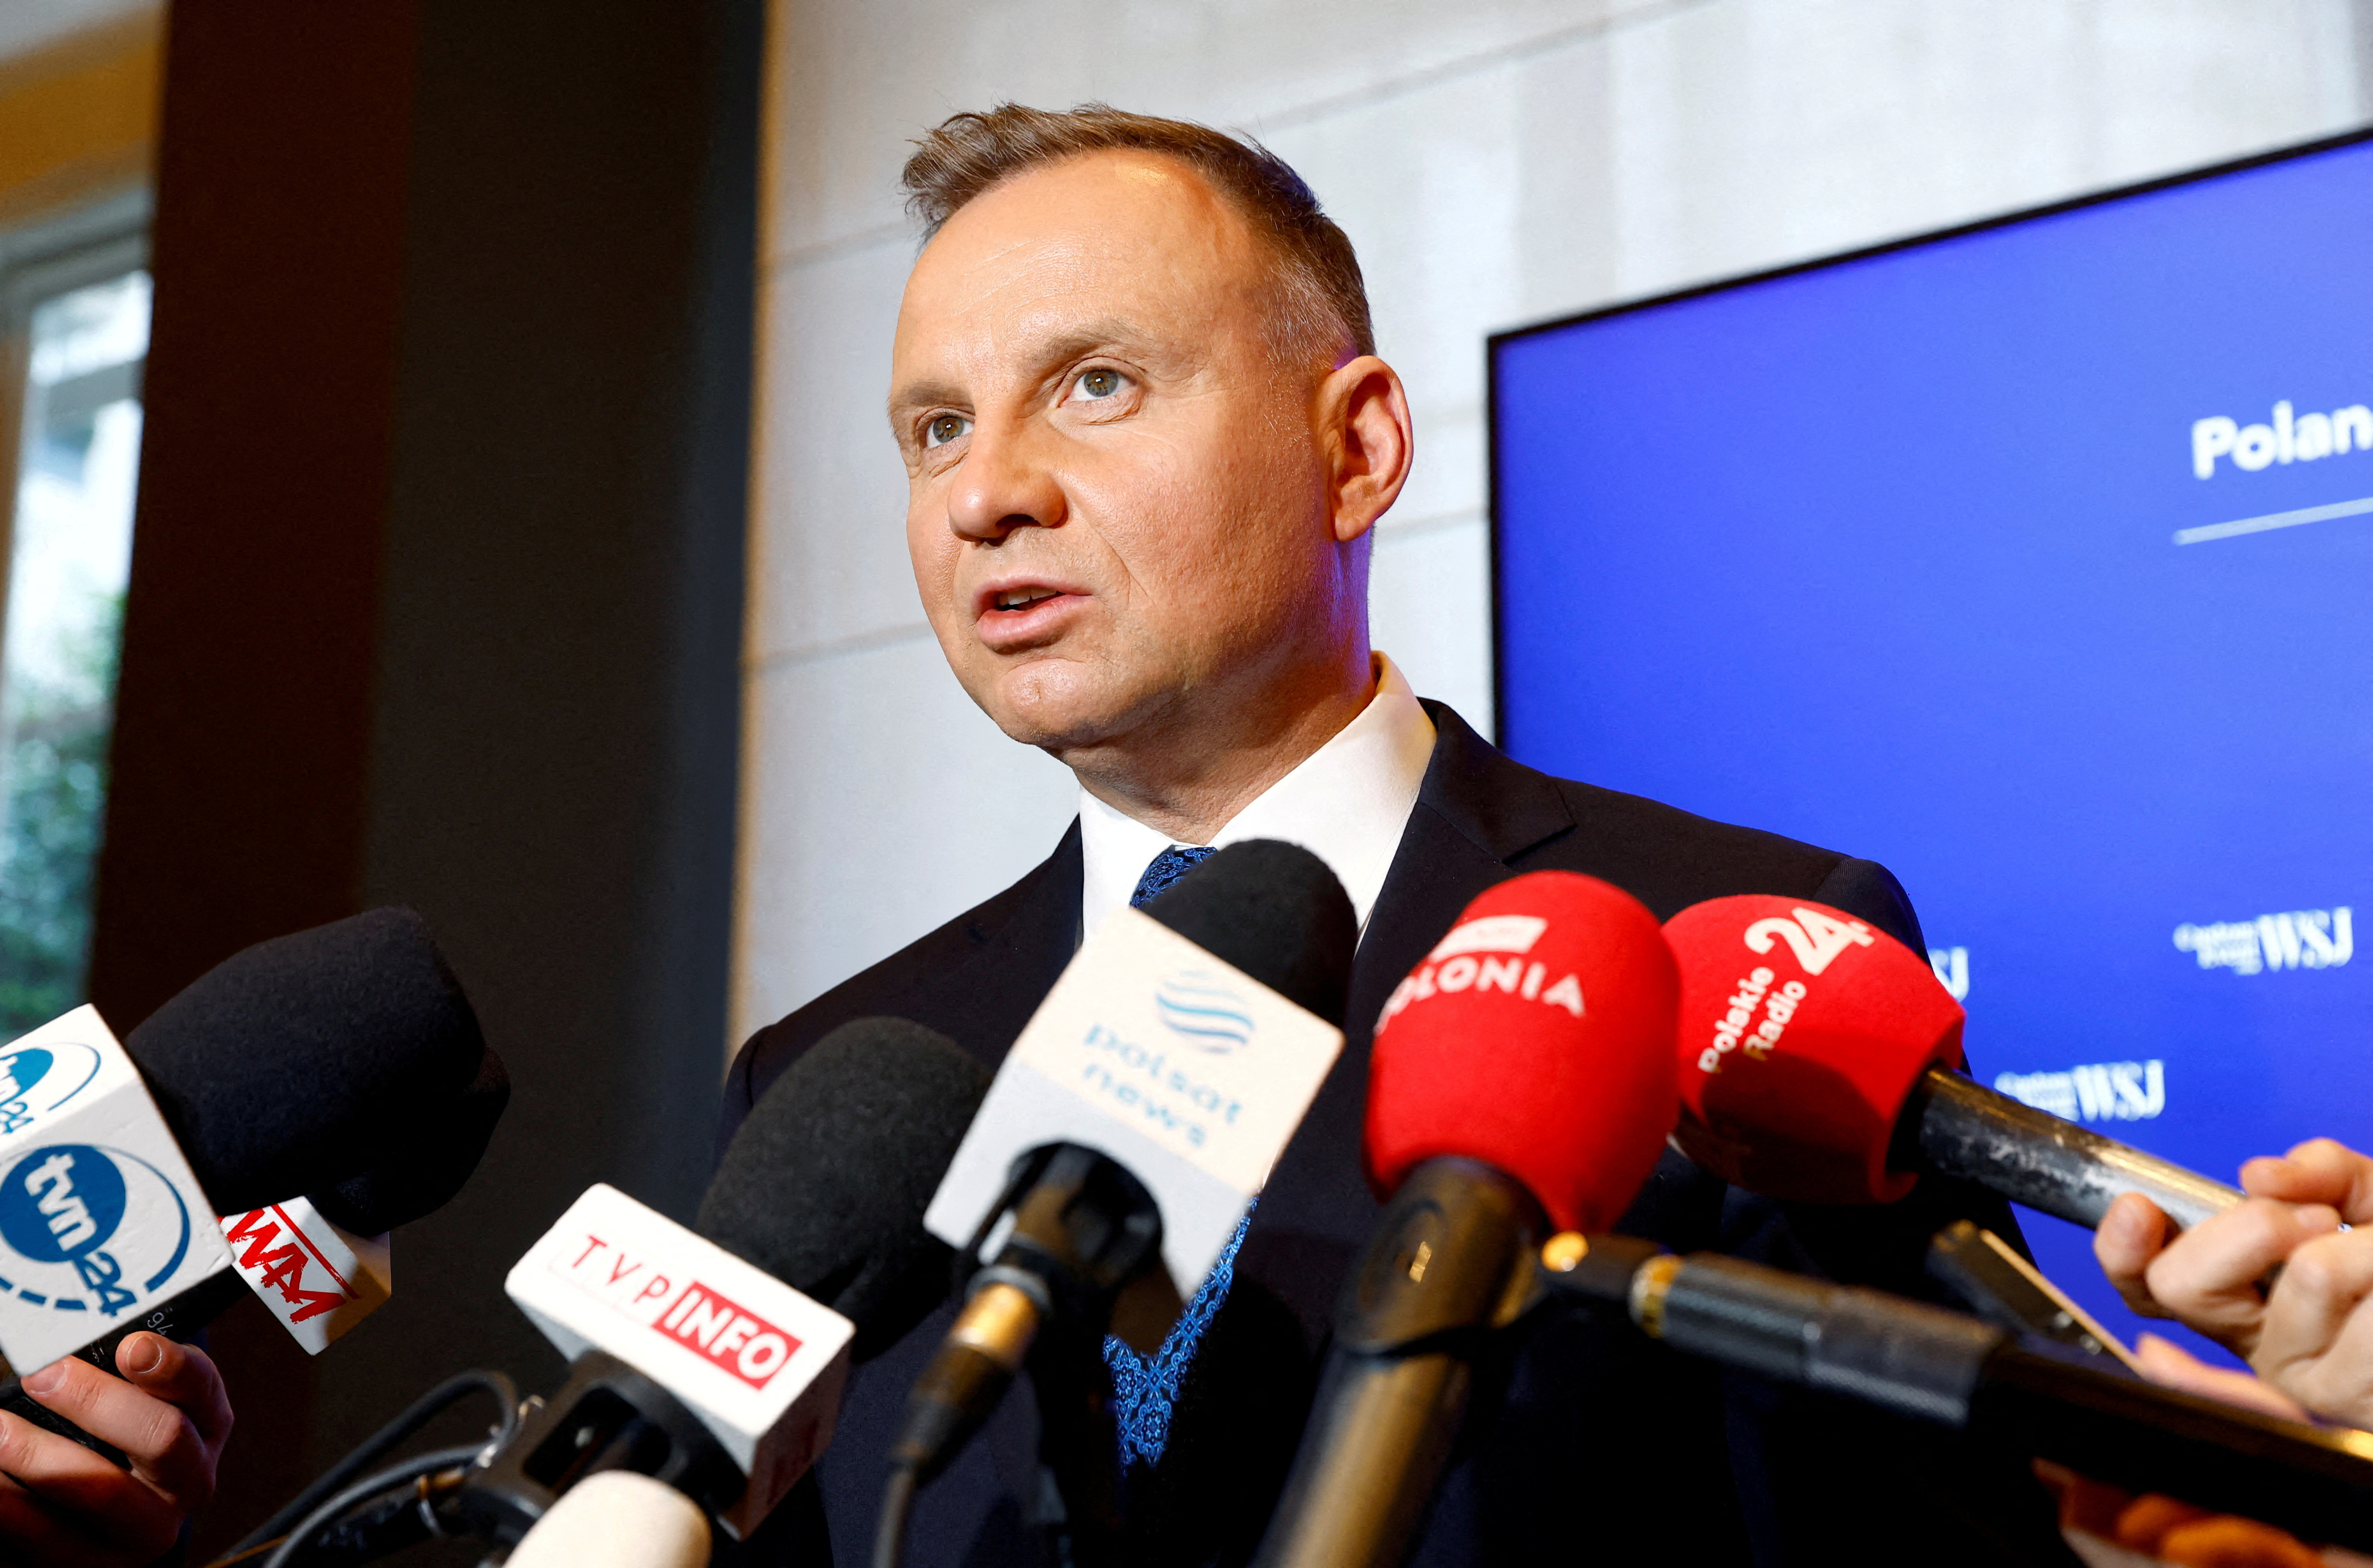 Polish President Andrzej Duda speaks during a press conference during a visit to London